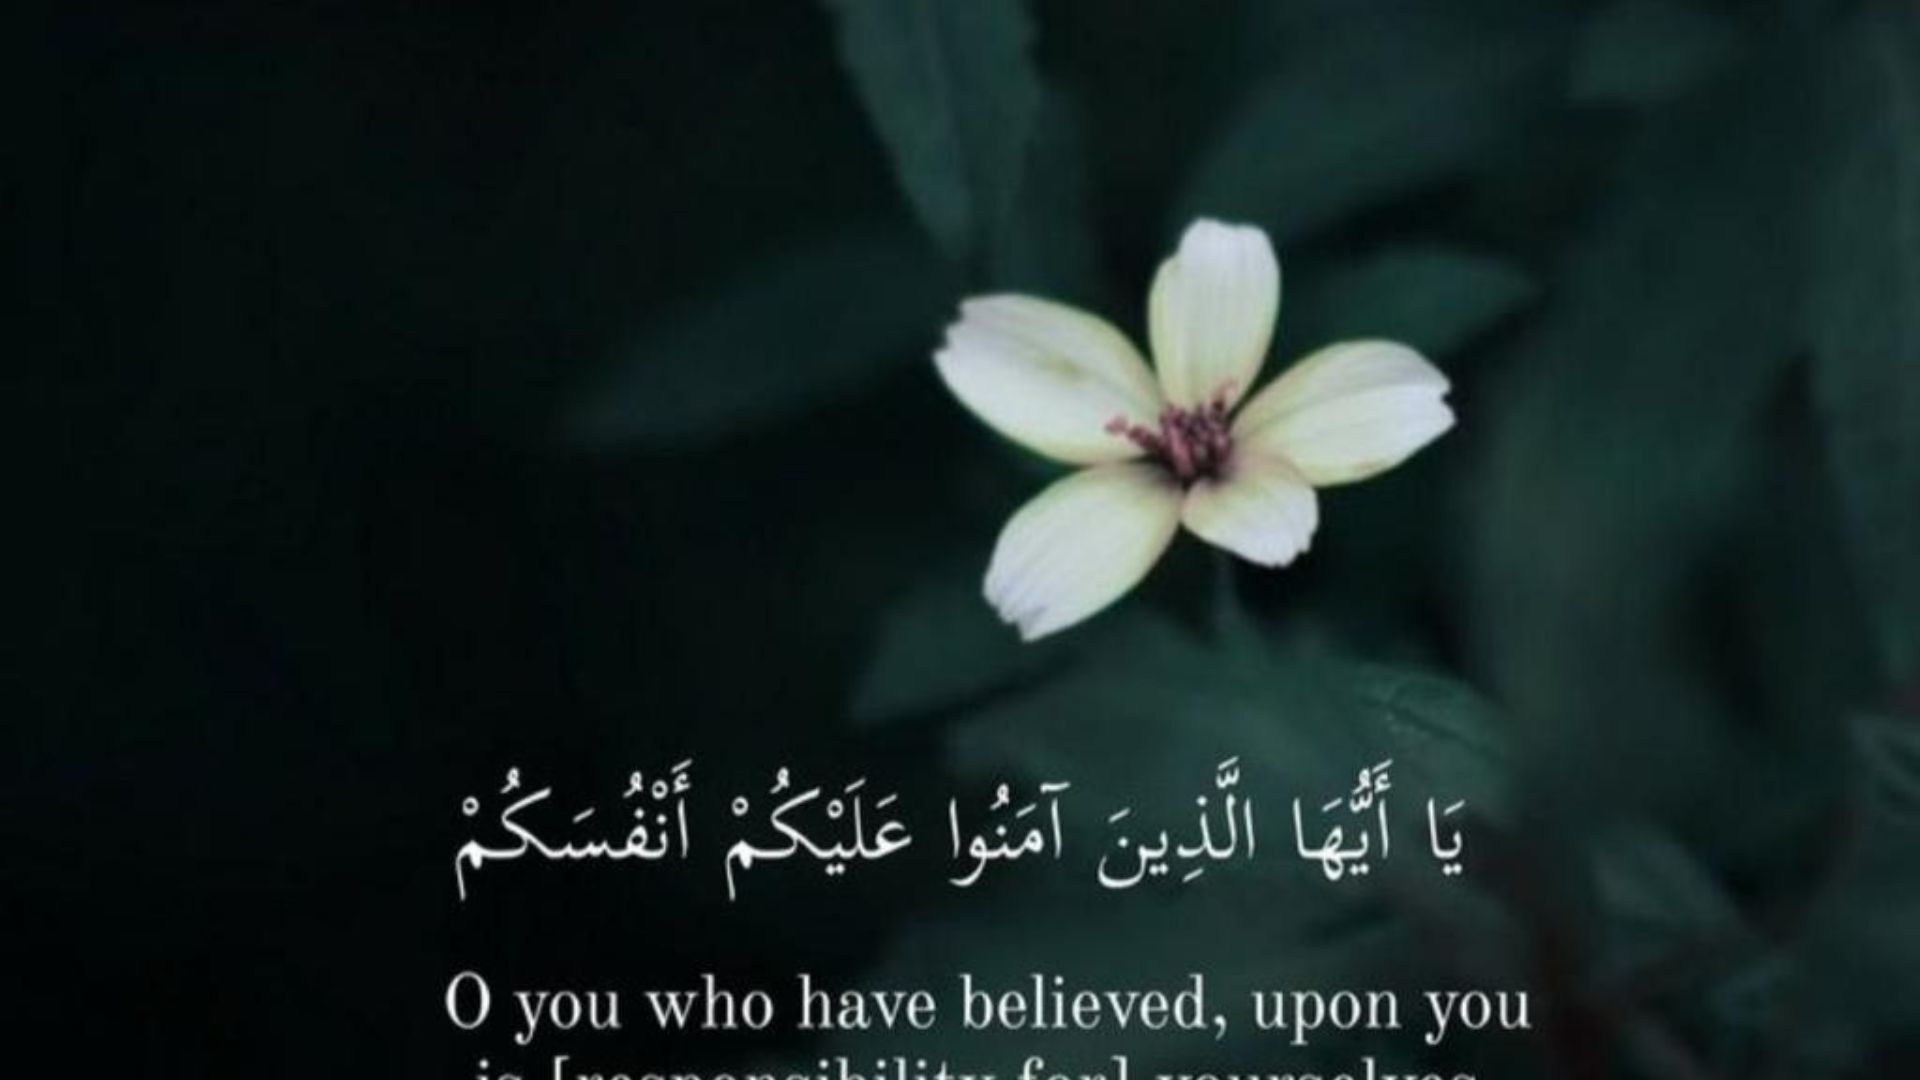 Islamic Quotes Wallpapers - Top 30 Best Islamic Quotes Backgrounds Download